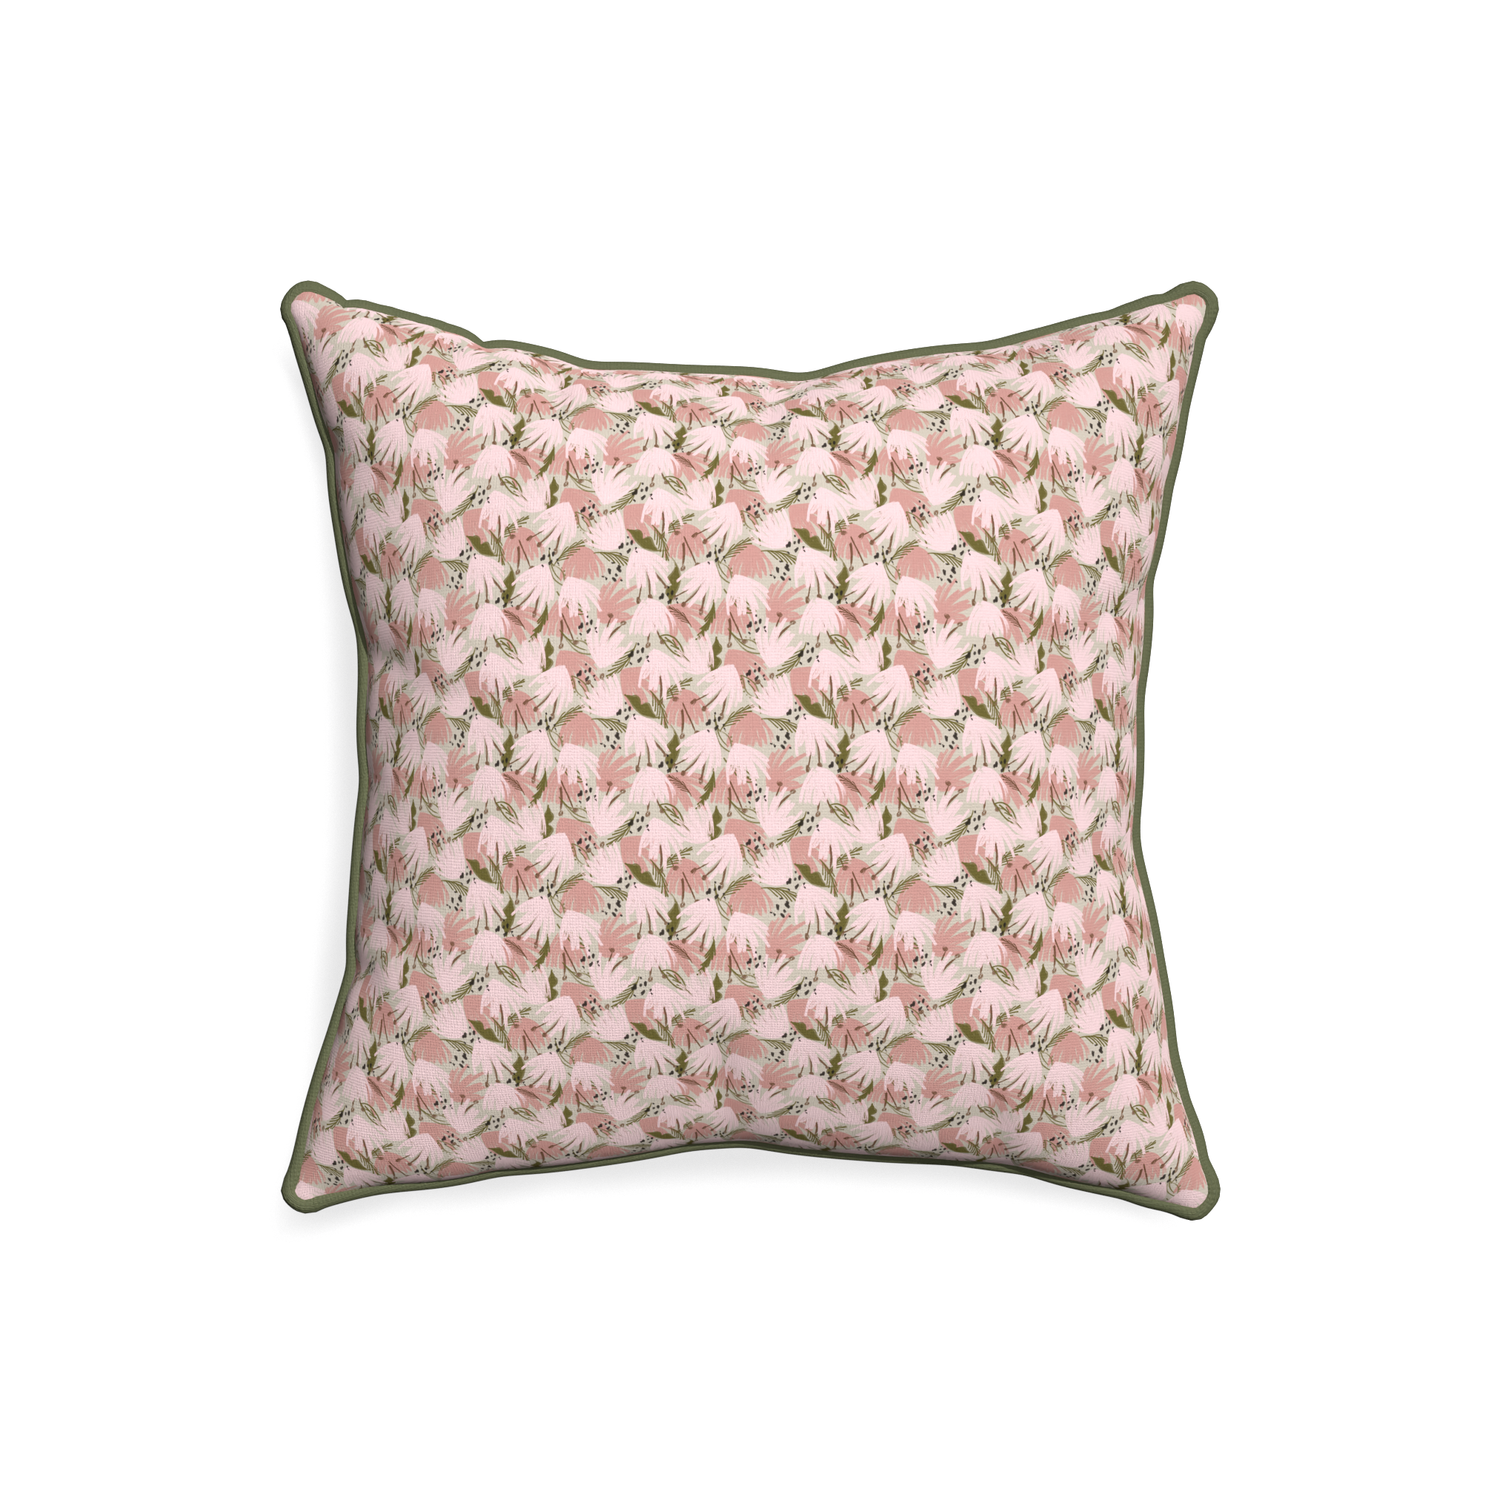 20-square eden pink custom pink floralpillow with f piping on white background